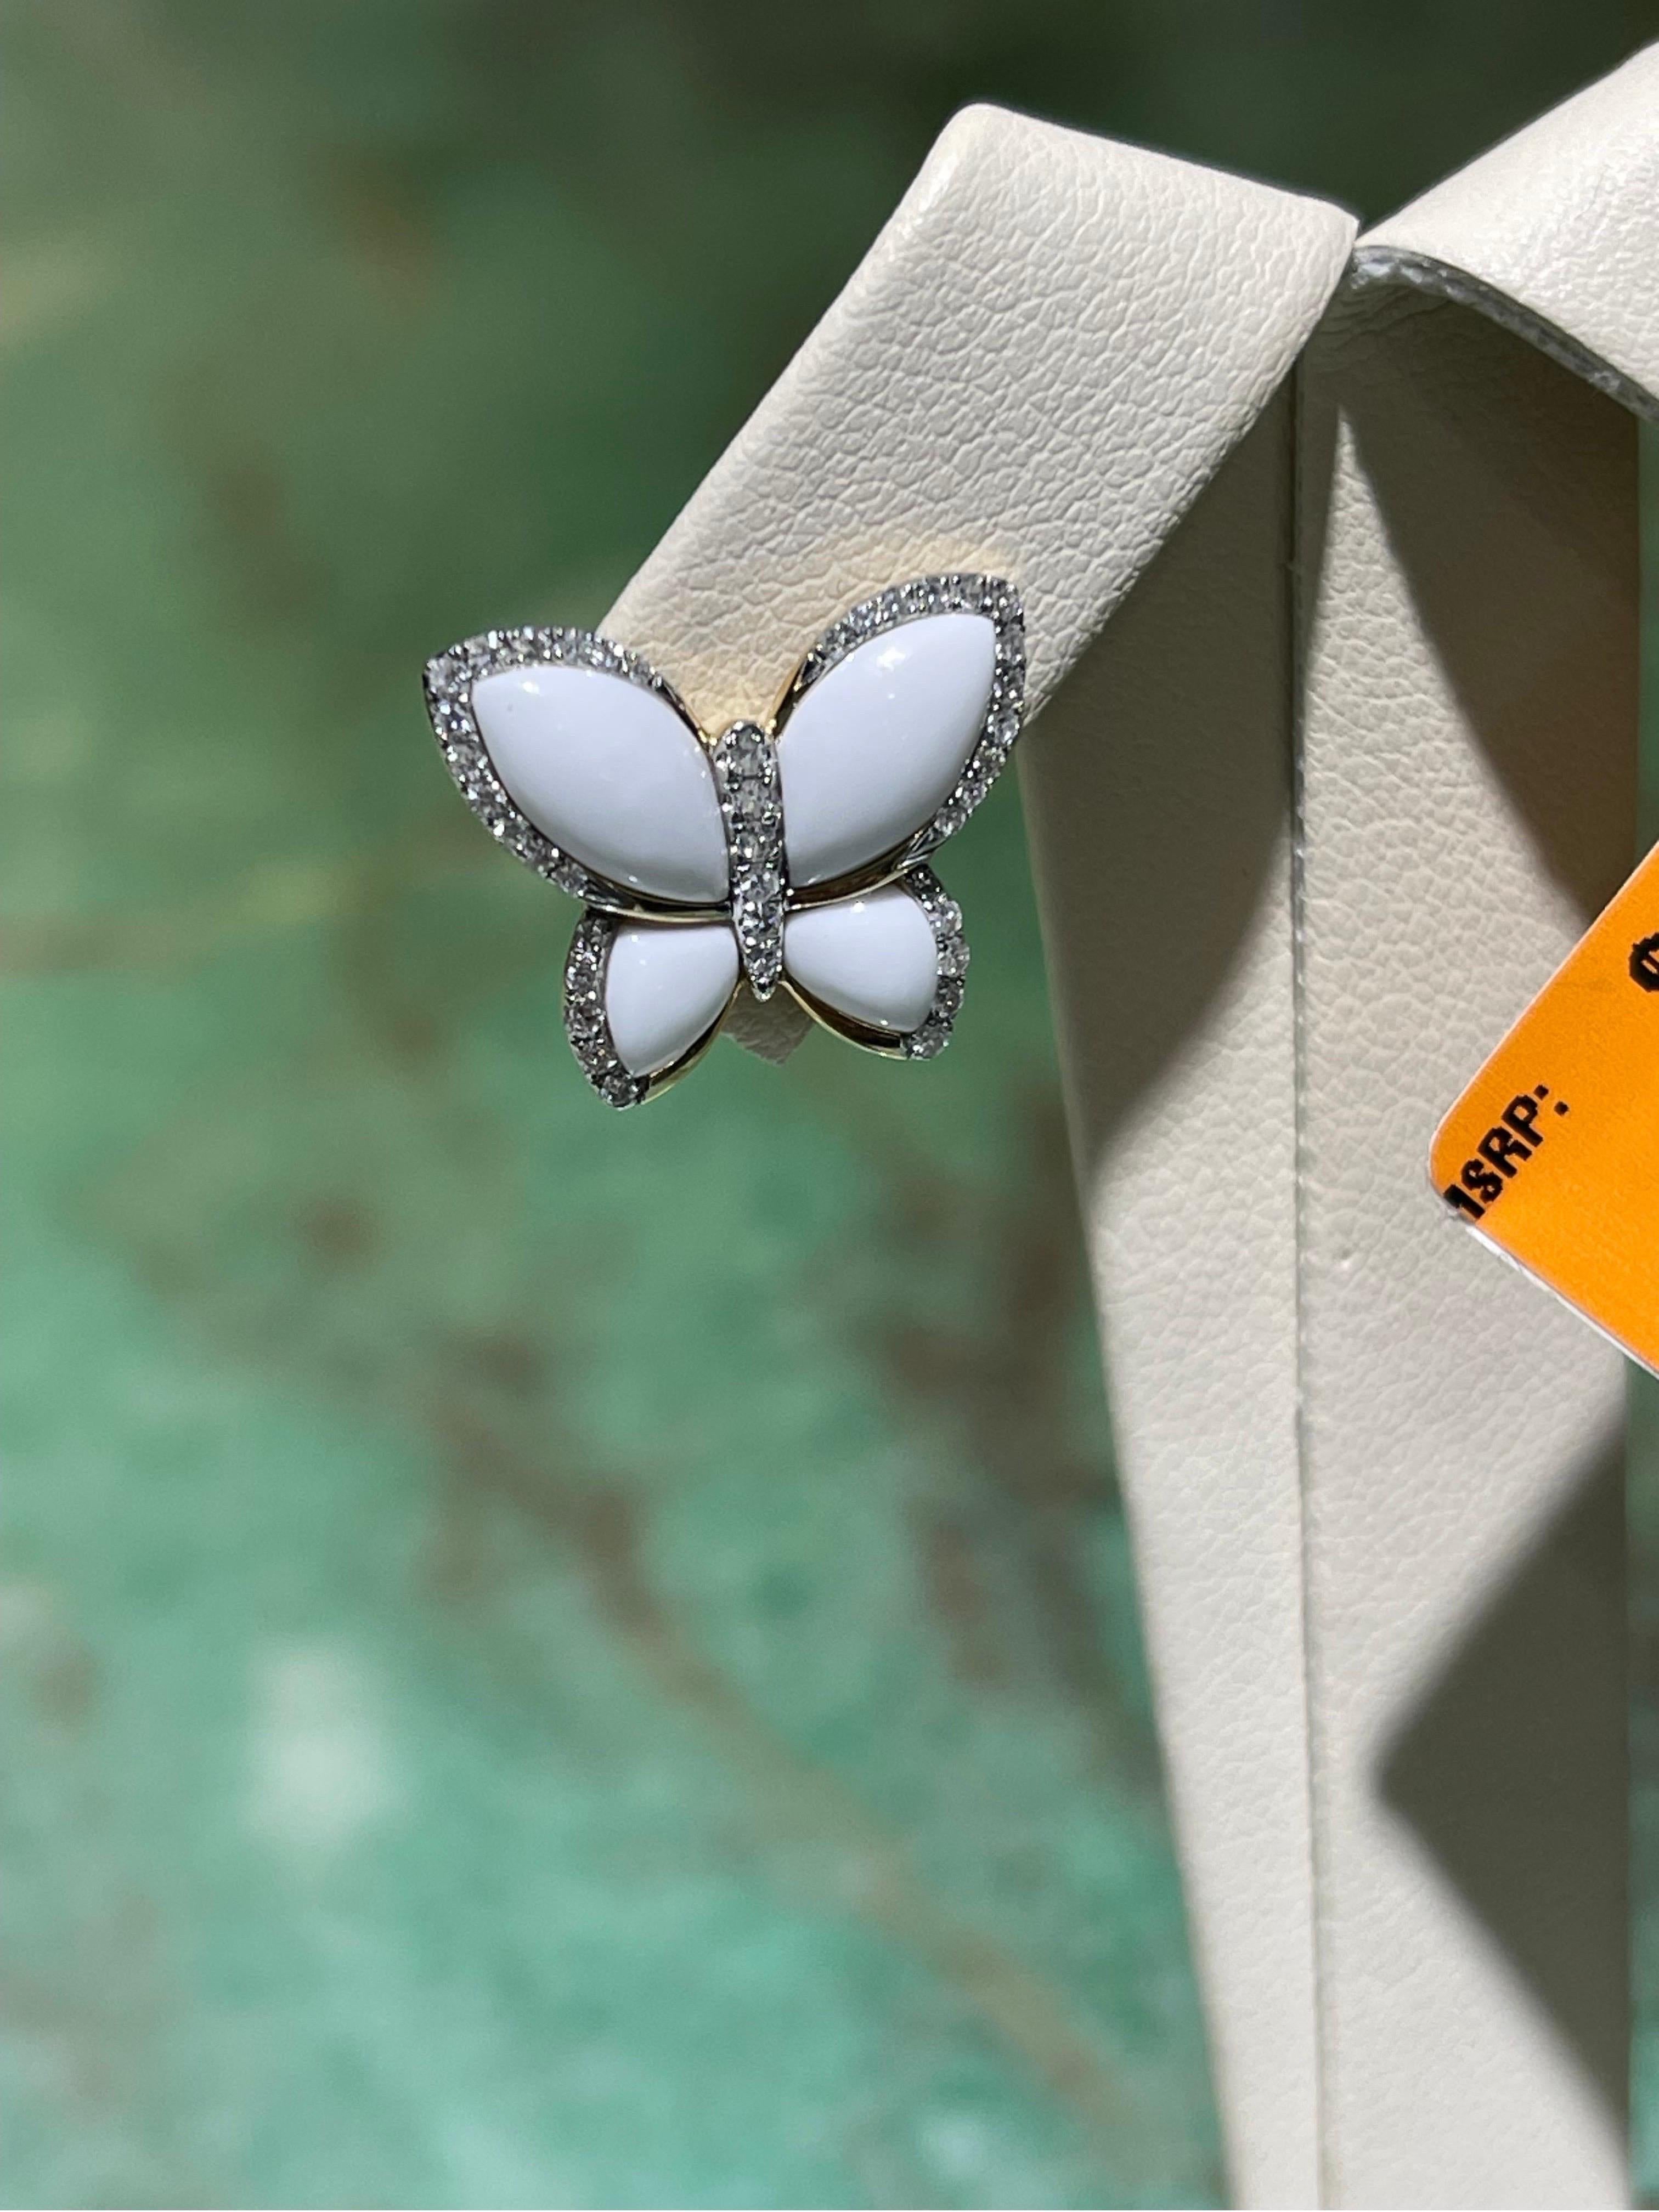 Gorgeous Effy butterfly earrings in 14k. New, with tag.

Beautiful white agate accompanied by clean diamond accents. Perfect for any occasion, these earrings are sure to make a statement and become a staple in your collection.

Width is